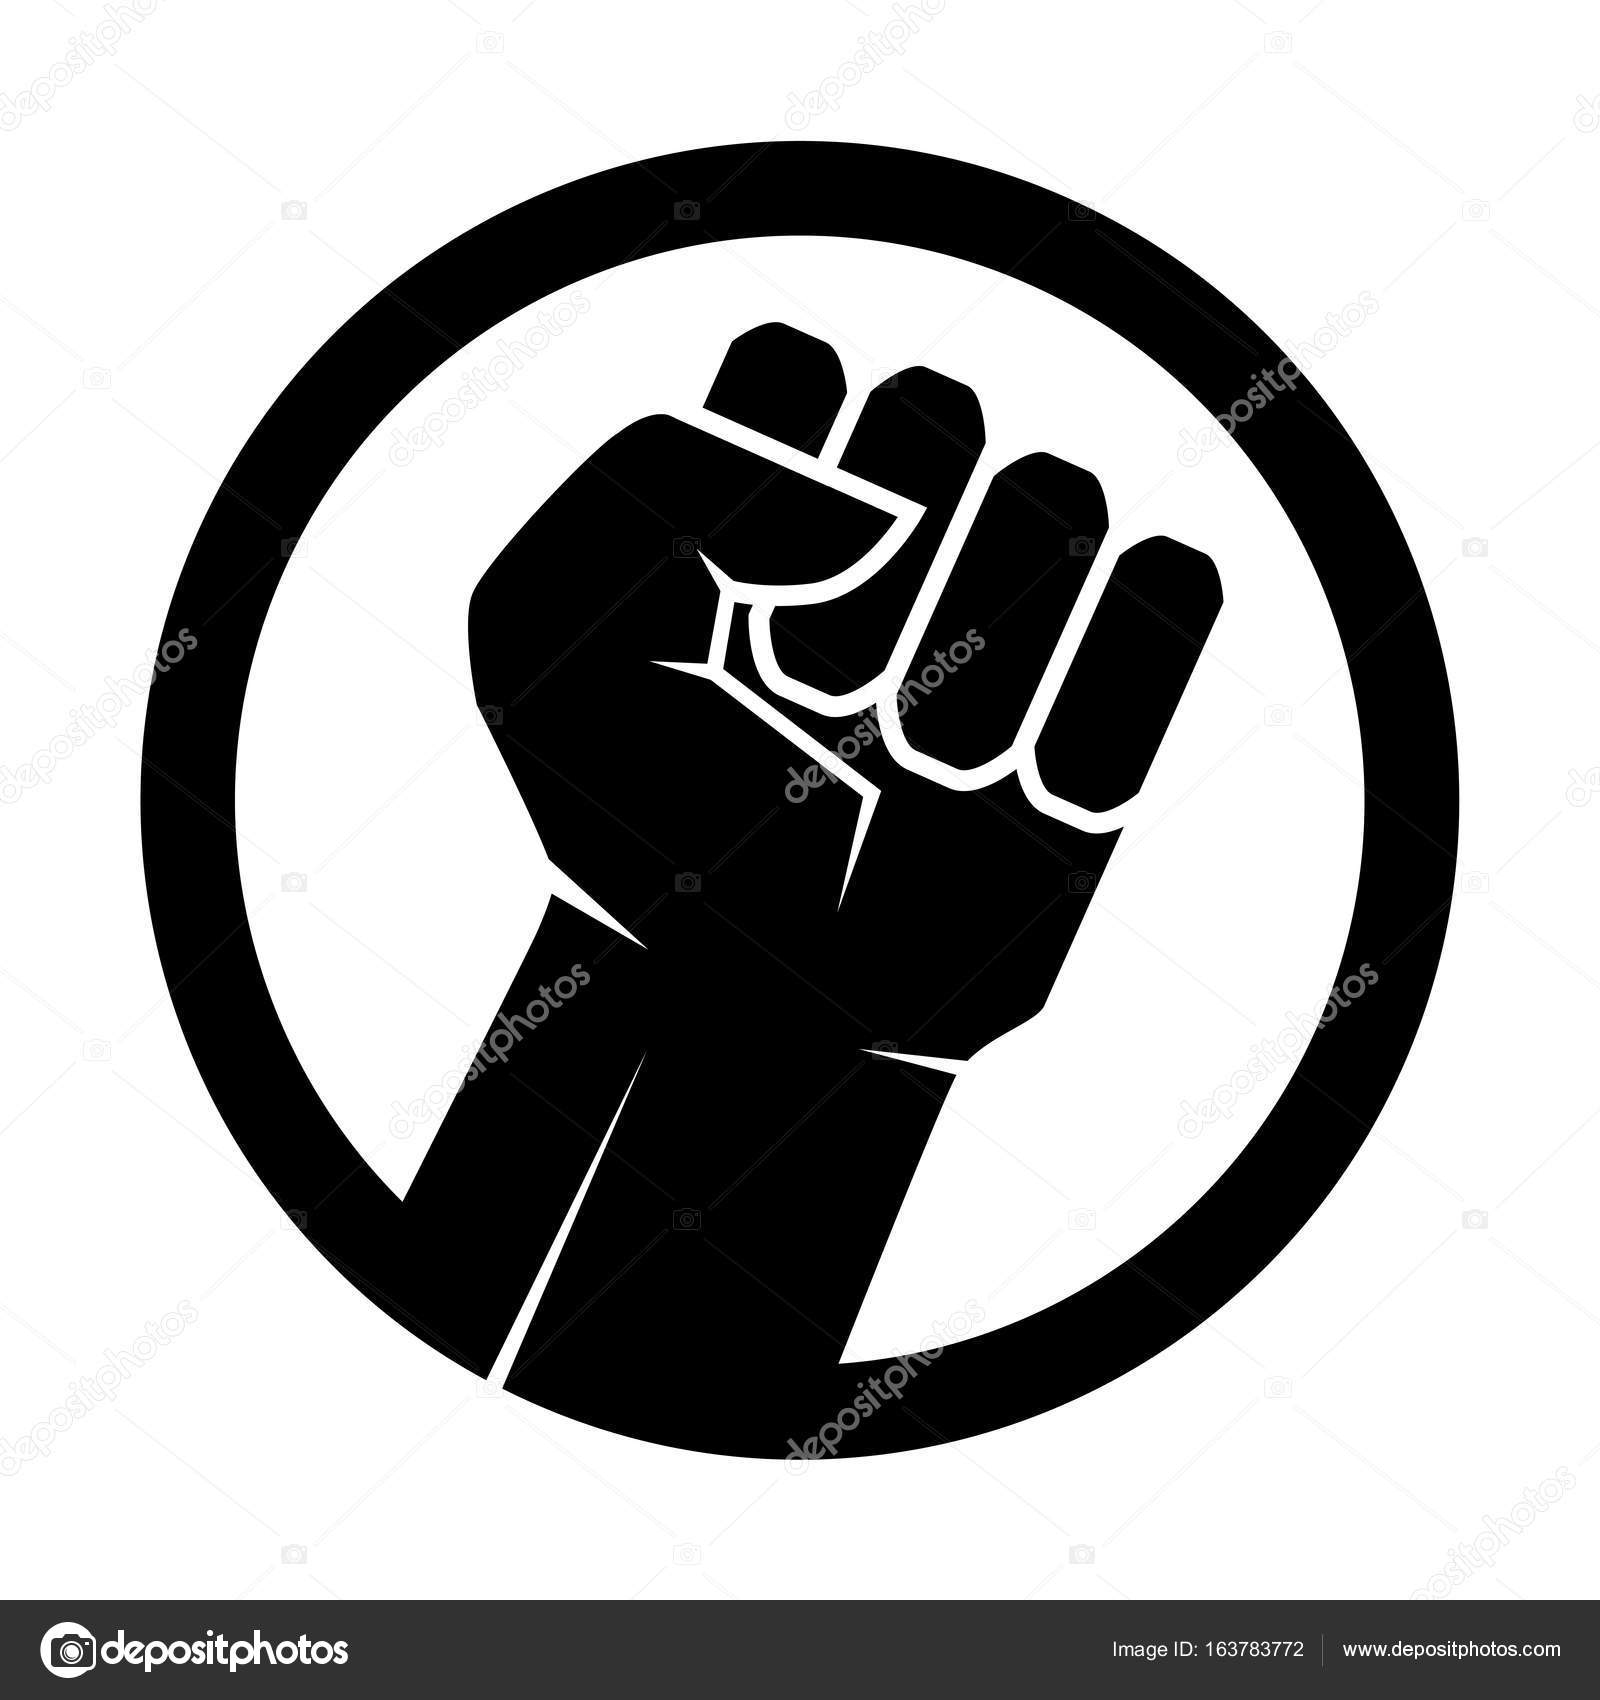 A hand clenched into a fist icon Royalty Free Vector Image